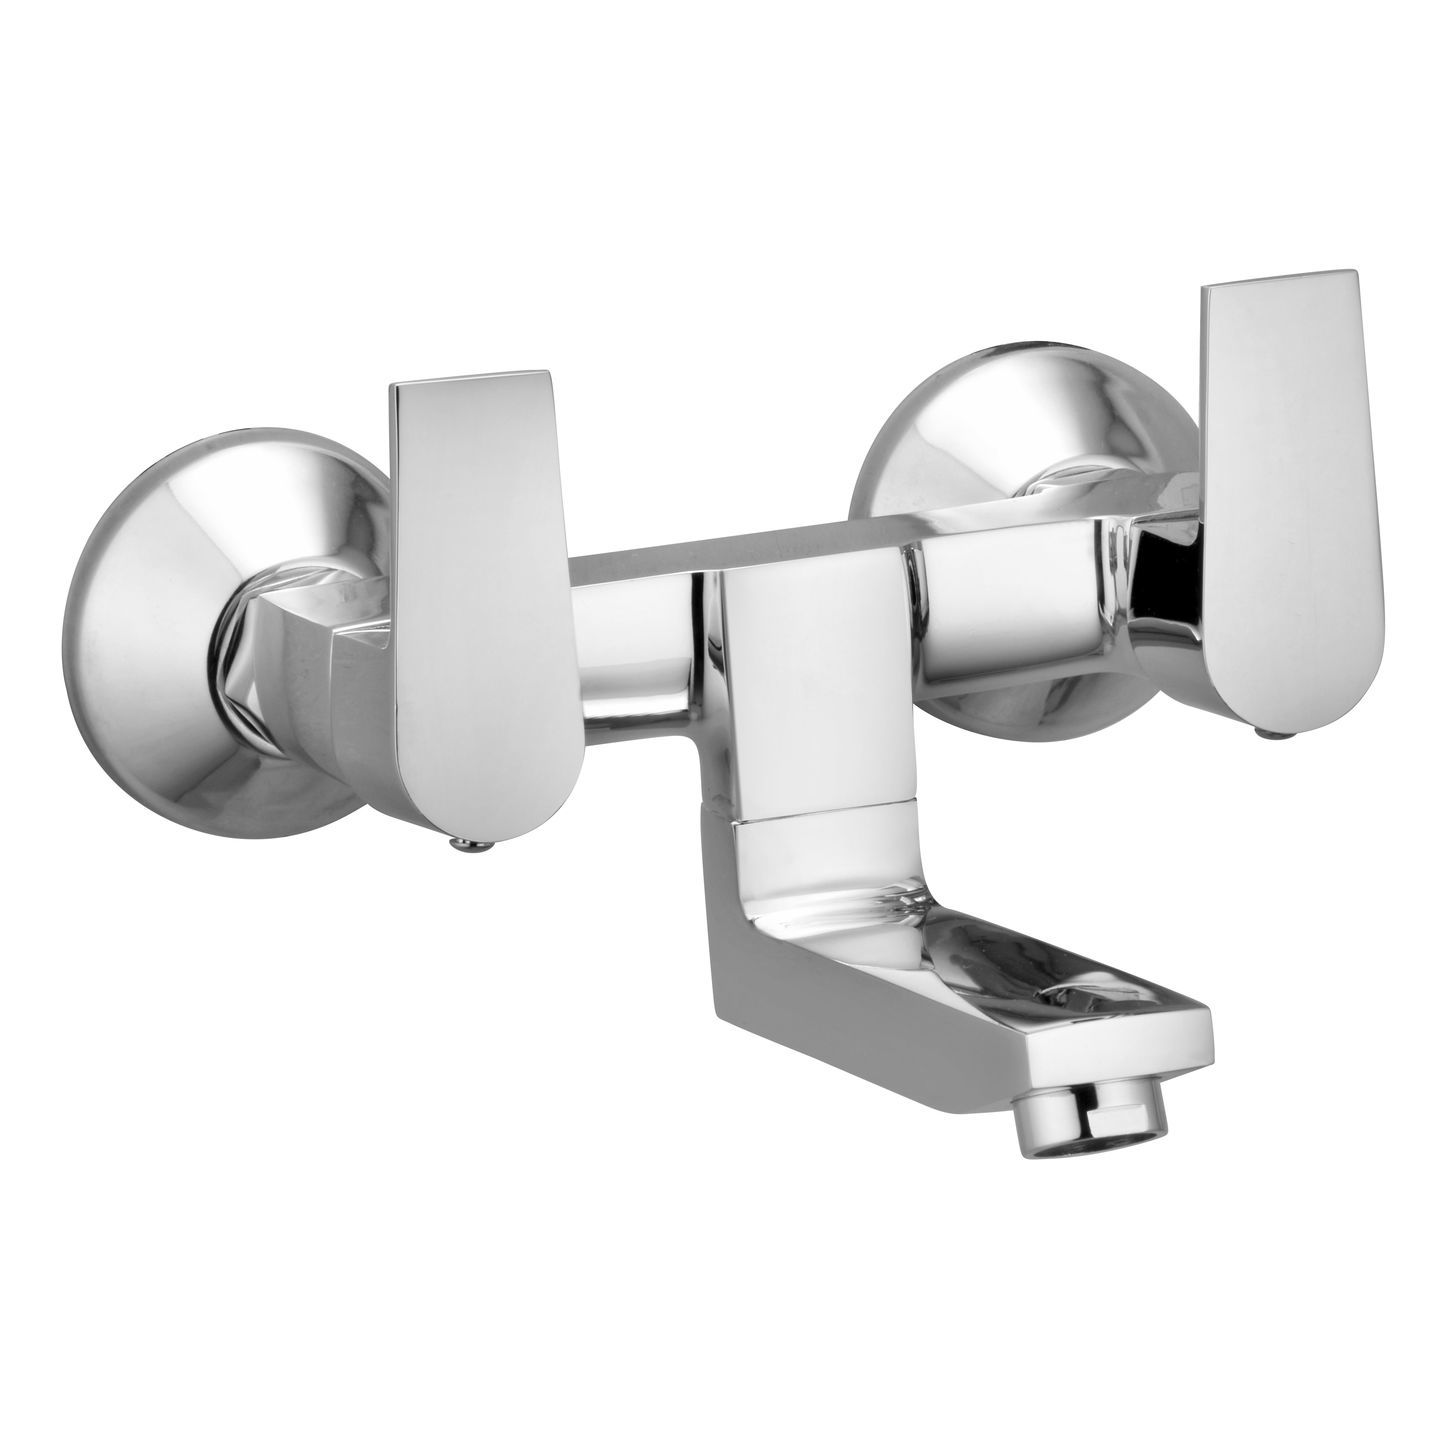 AMPLE WALL MIXER NON TELEPHONIC